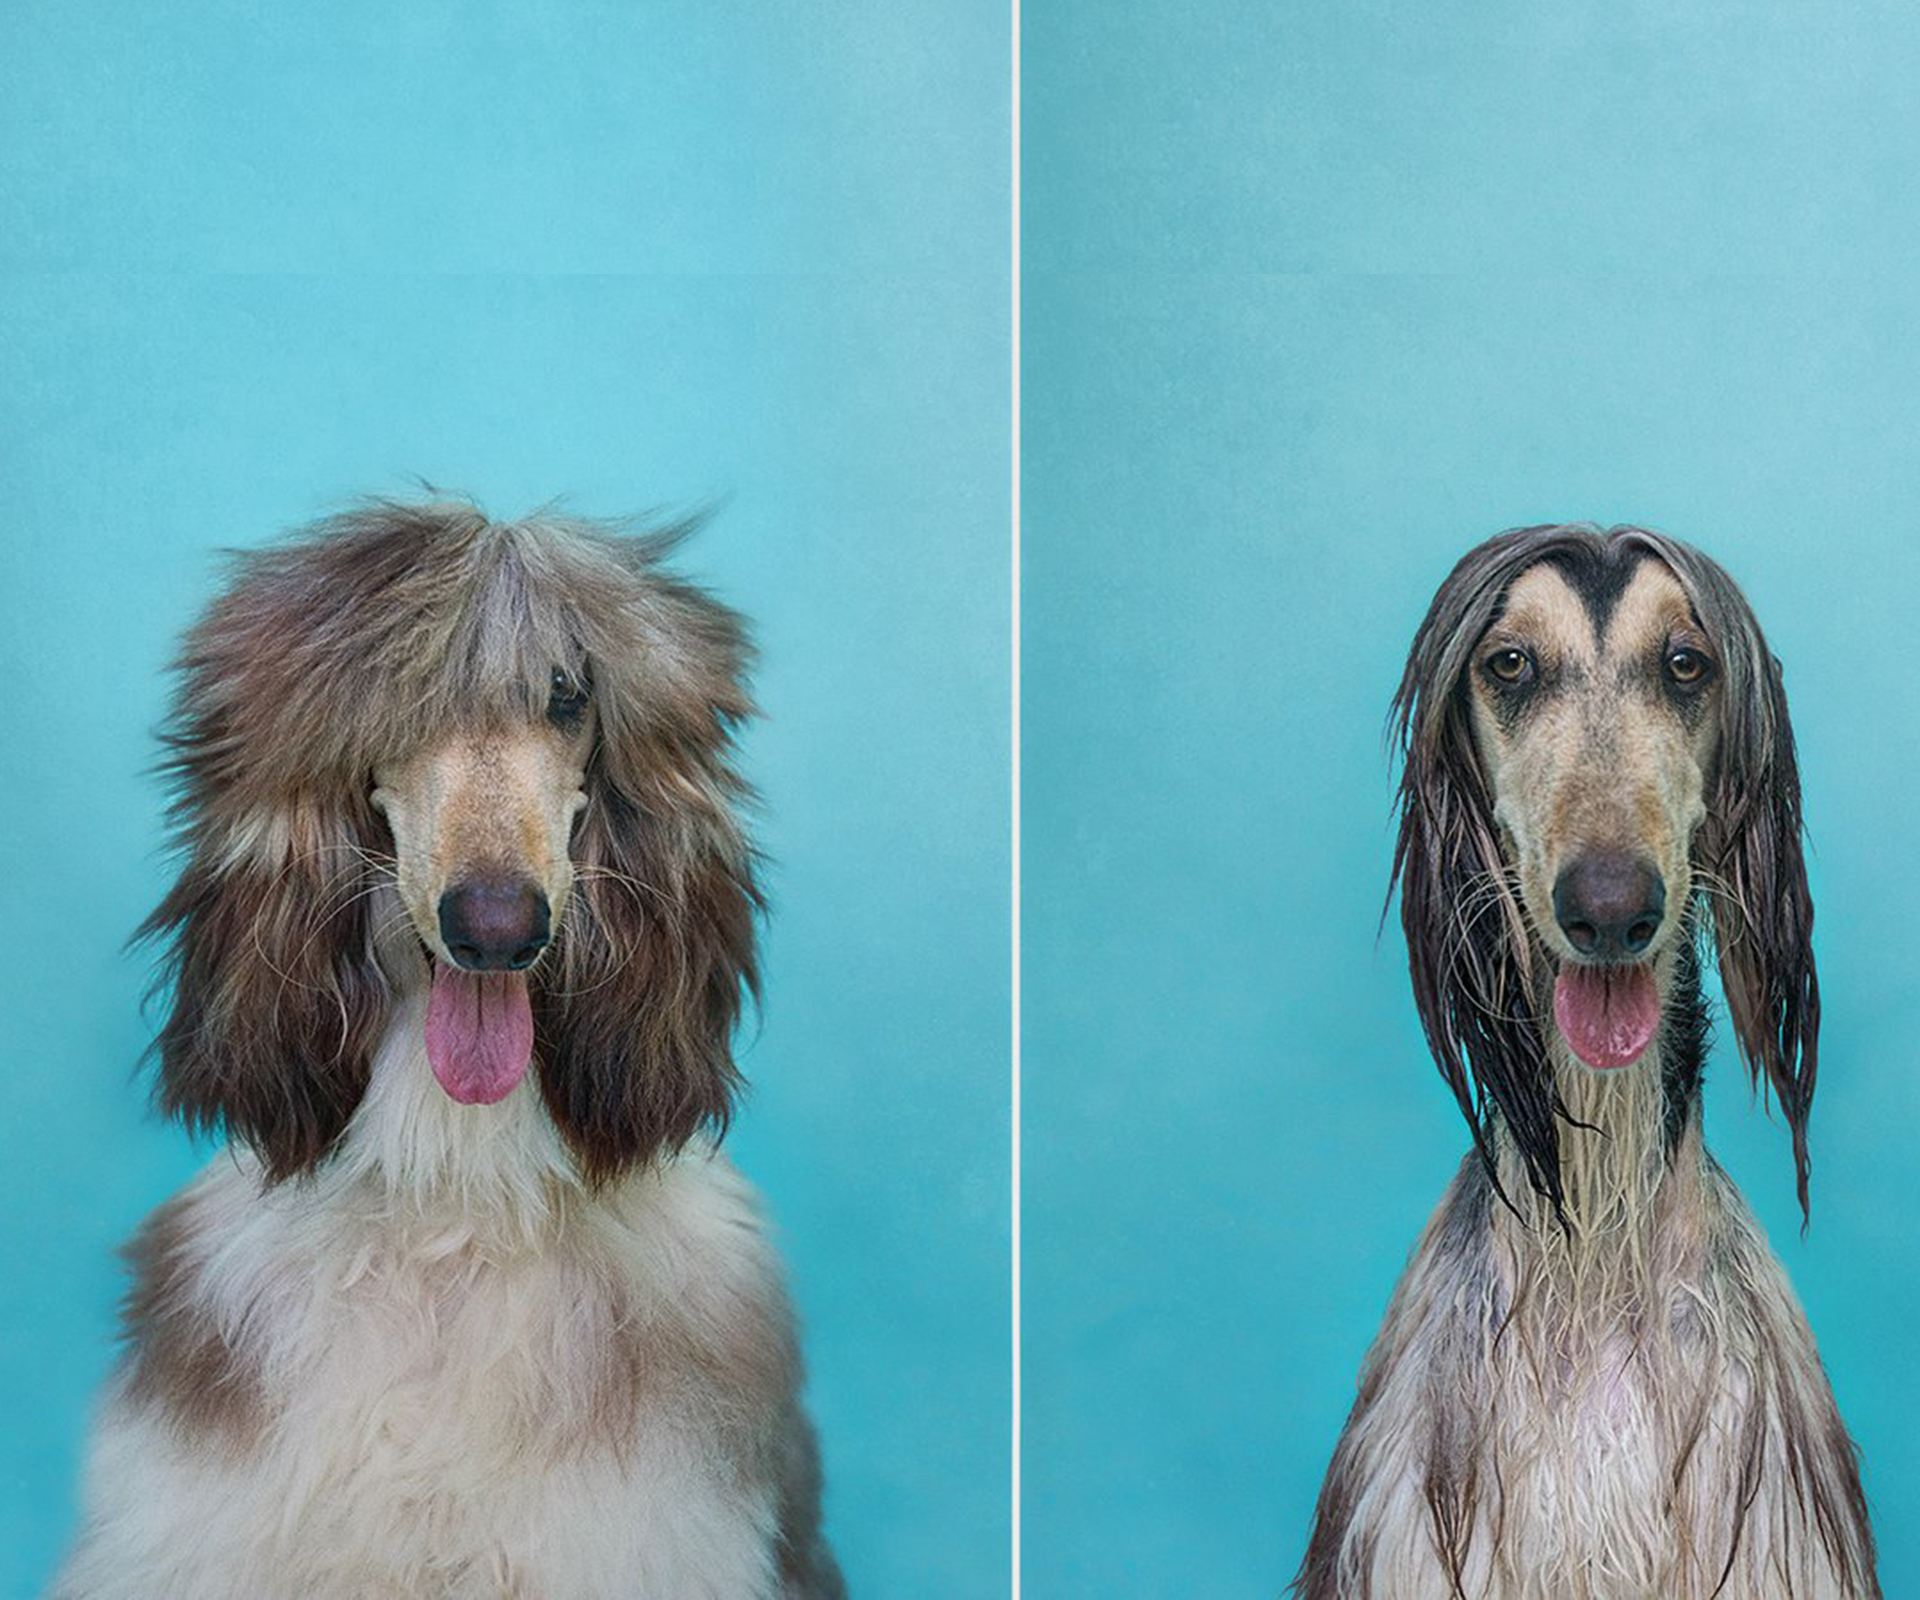 Dry Dog Wet Dog: Photographer’s portraits of dogs before and after bath time